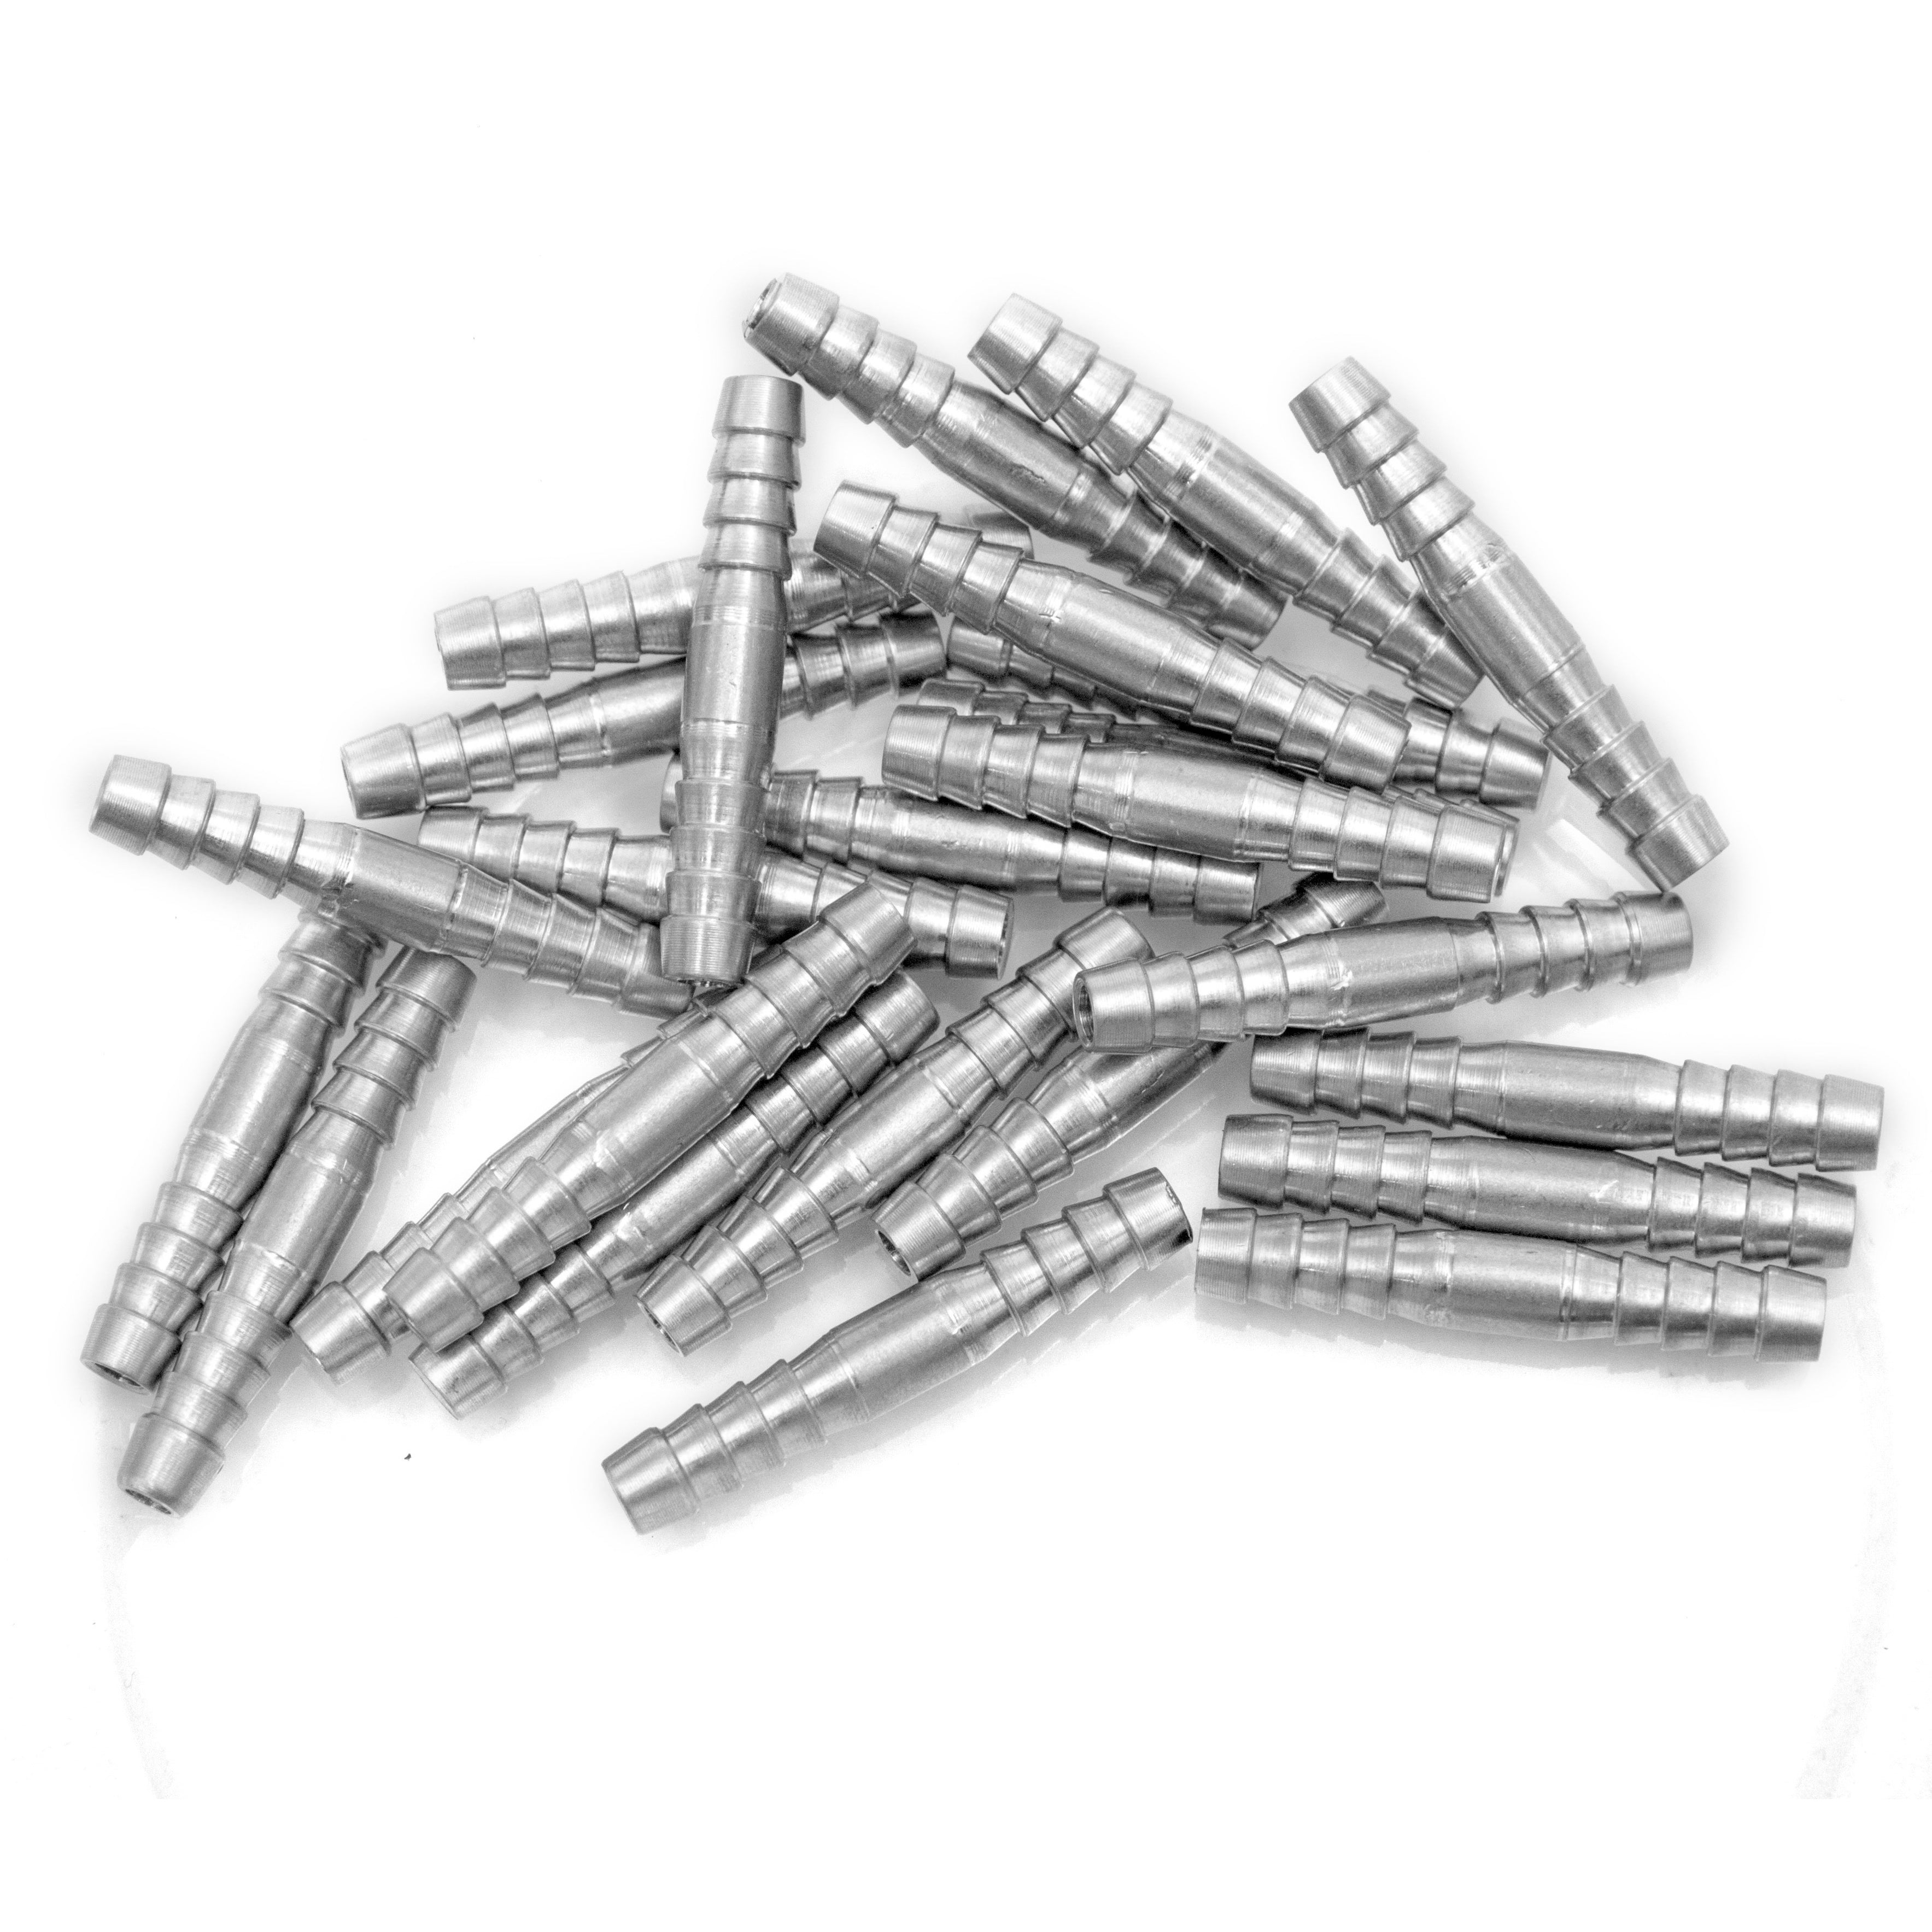 LTWFITTING Bar Production Stainless Steel 316 Barb Splicer Mender 3/16 Inch Hose ID Fitting Air Water Fuel Boat (Pack of 25)